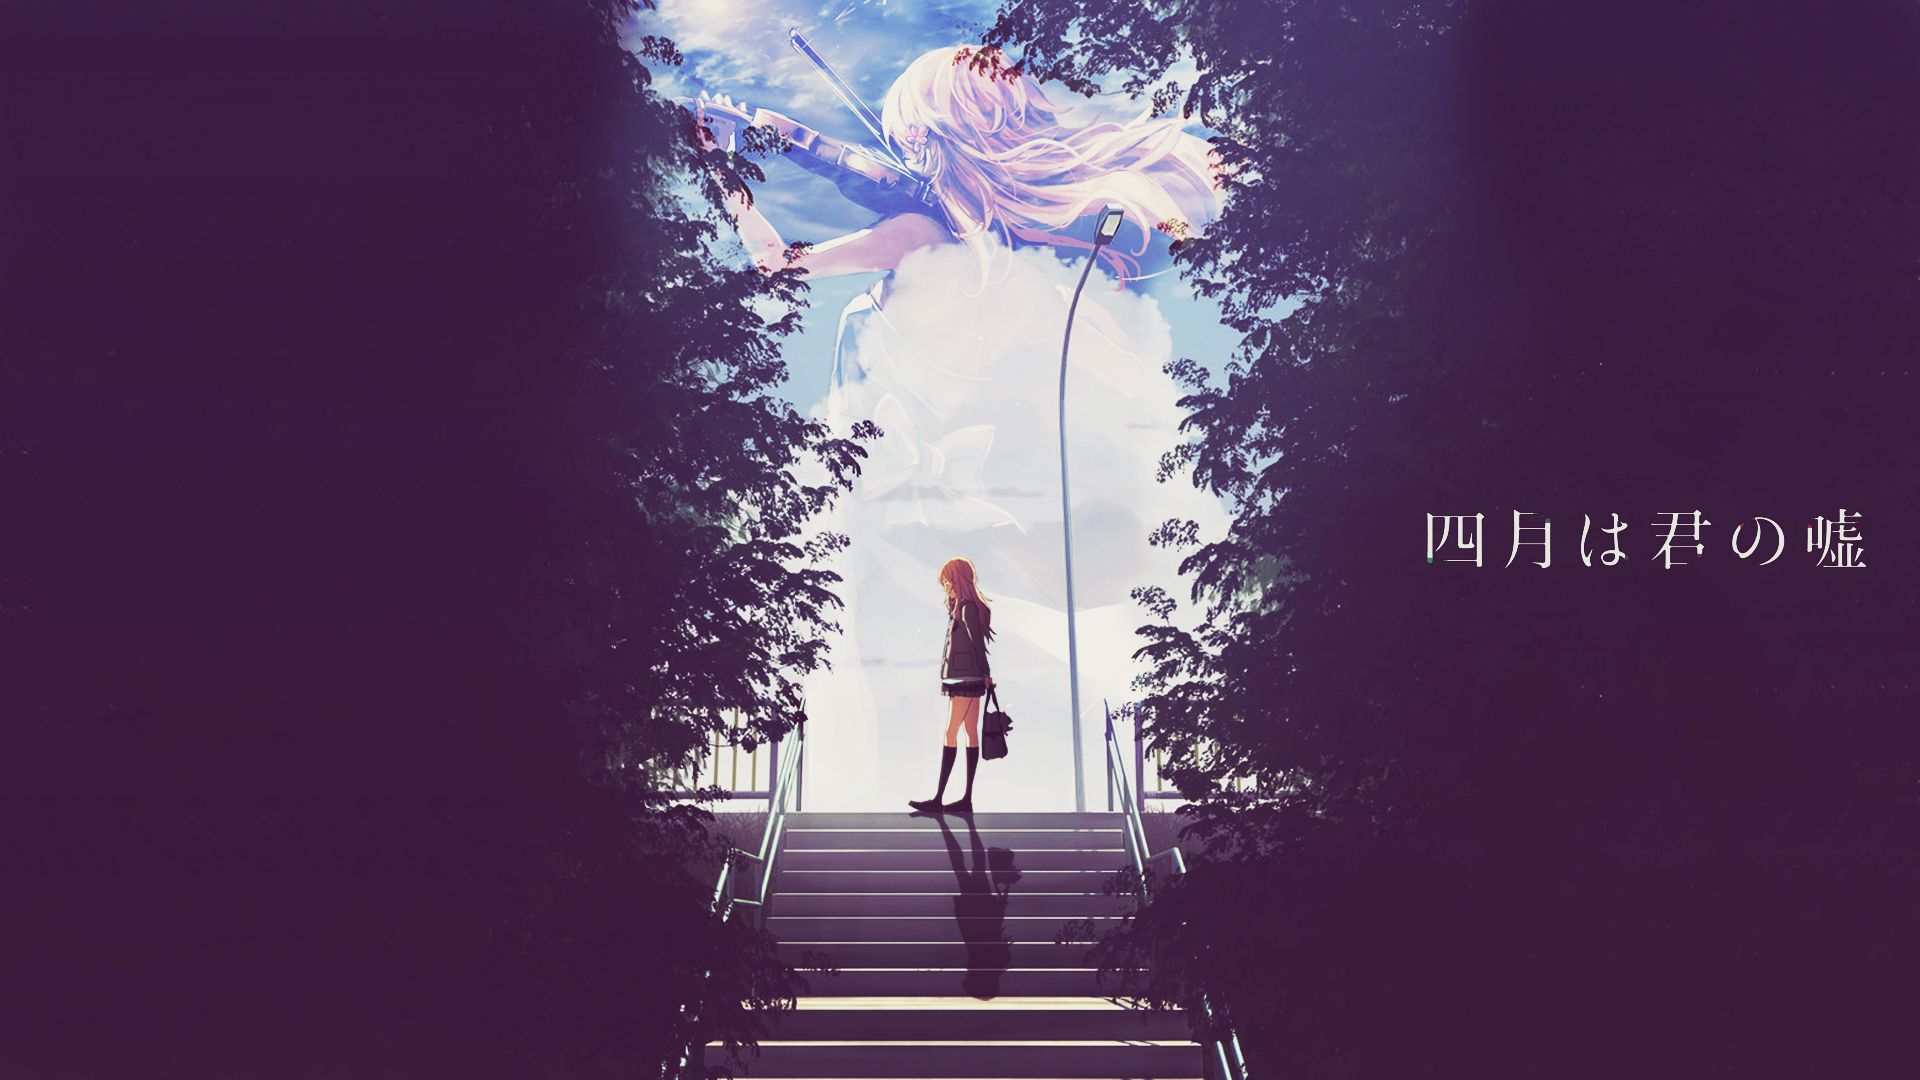 Your Lie in April Watercolor Wallpaper Free Your Lie